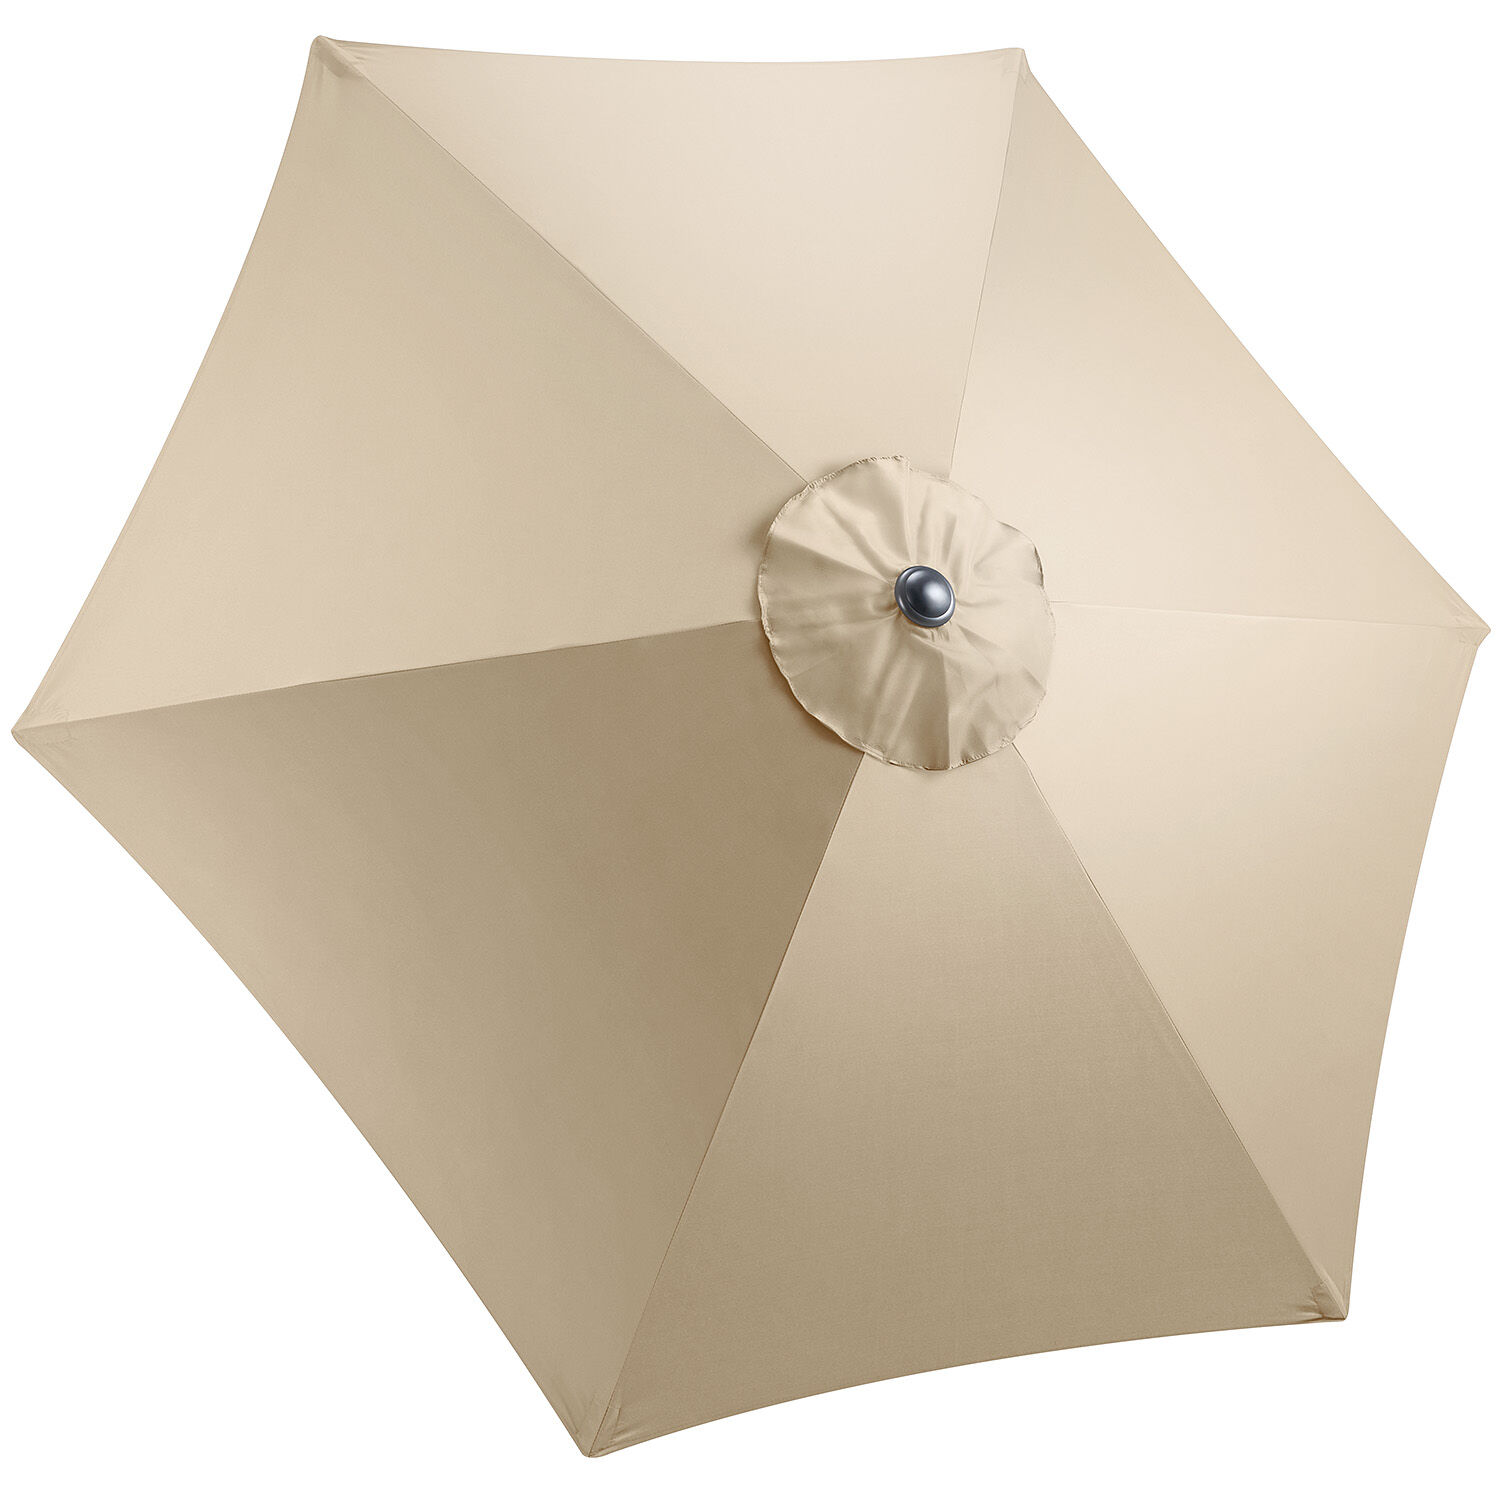 Christow 2.4m Replacement Parasol Canopy - Taupe